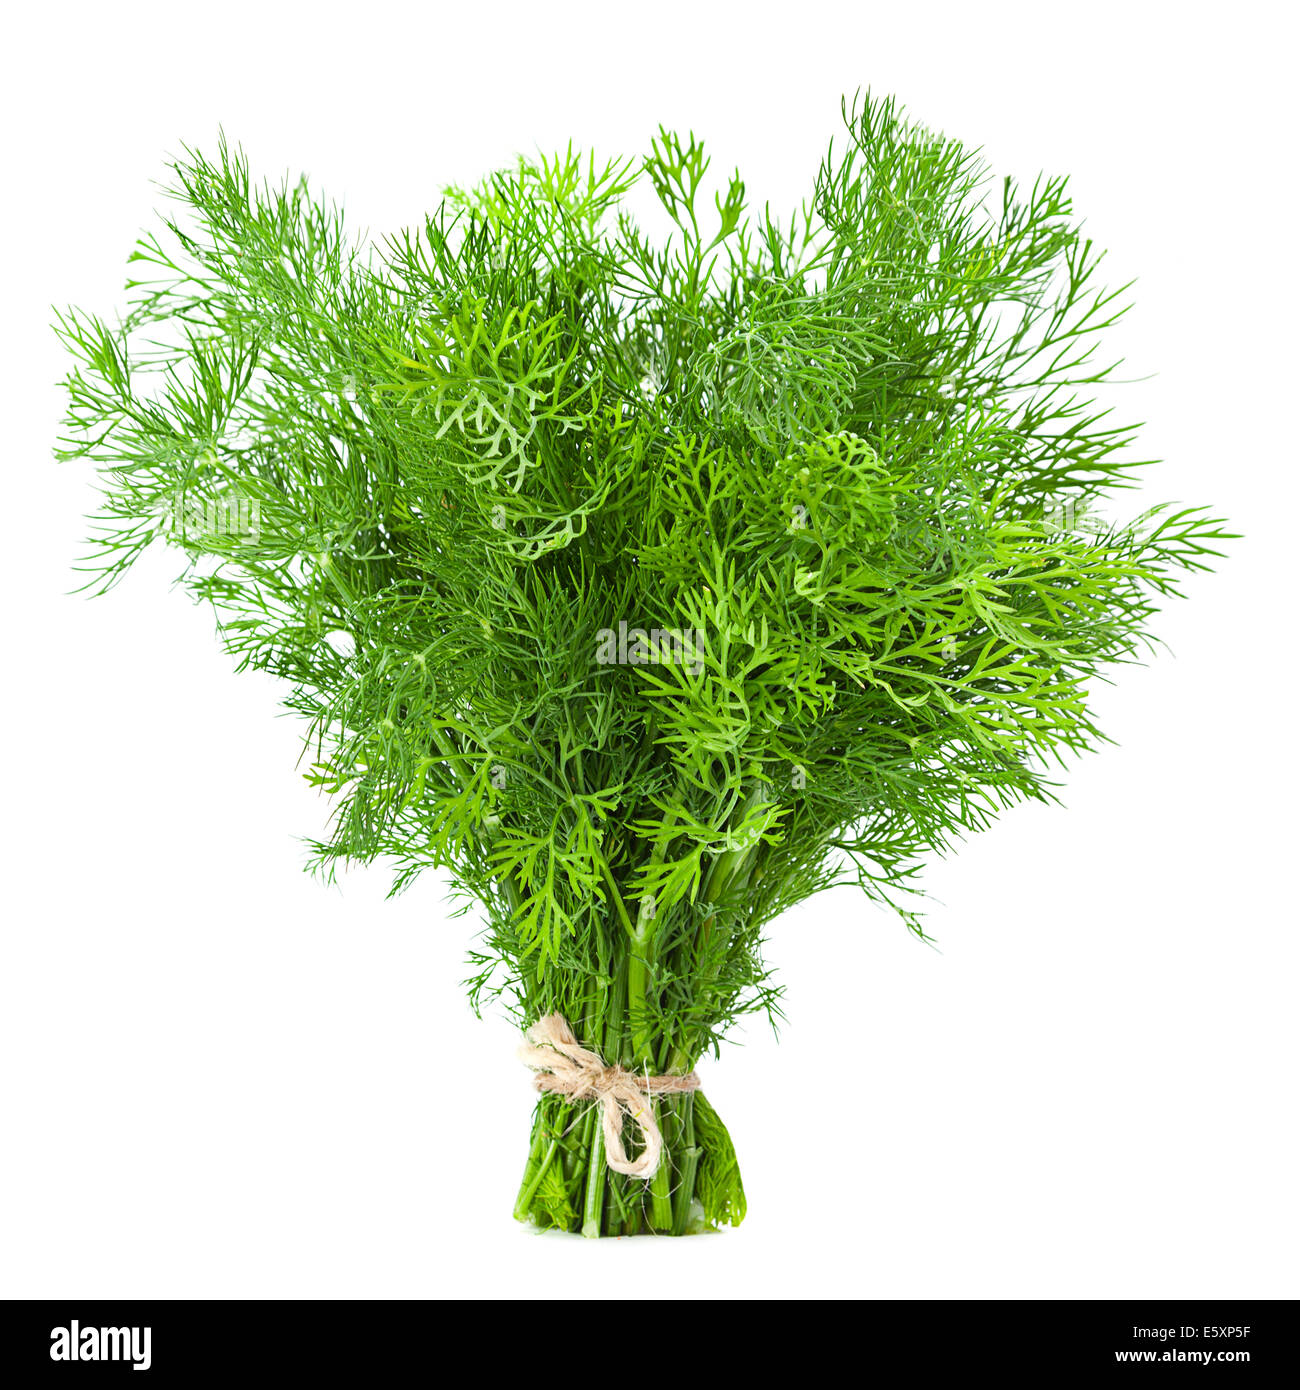 Dill herb closeup isolated on white background Stock Photo